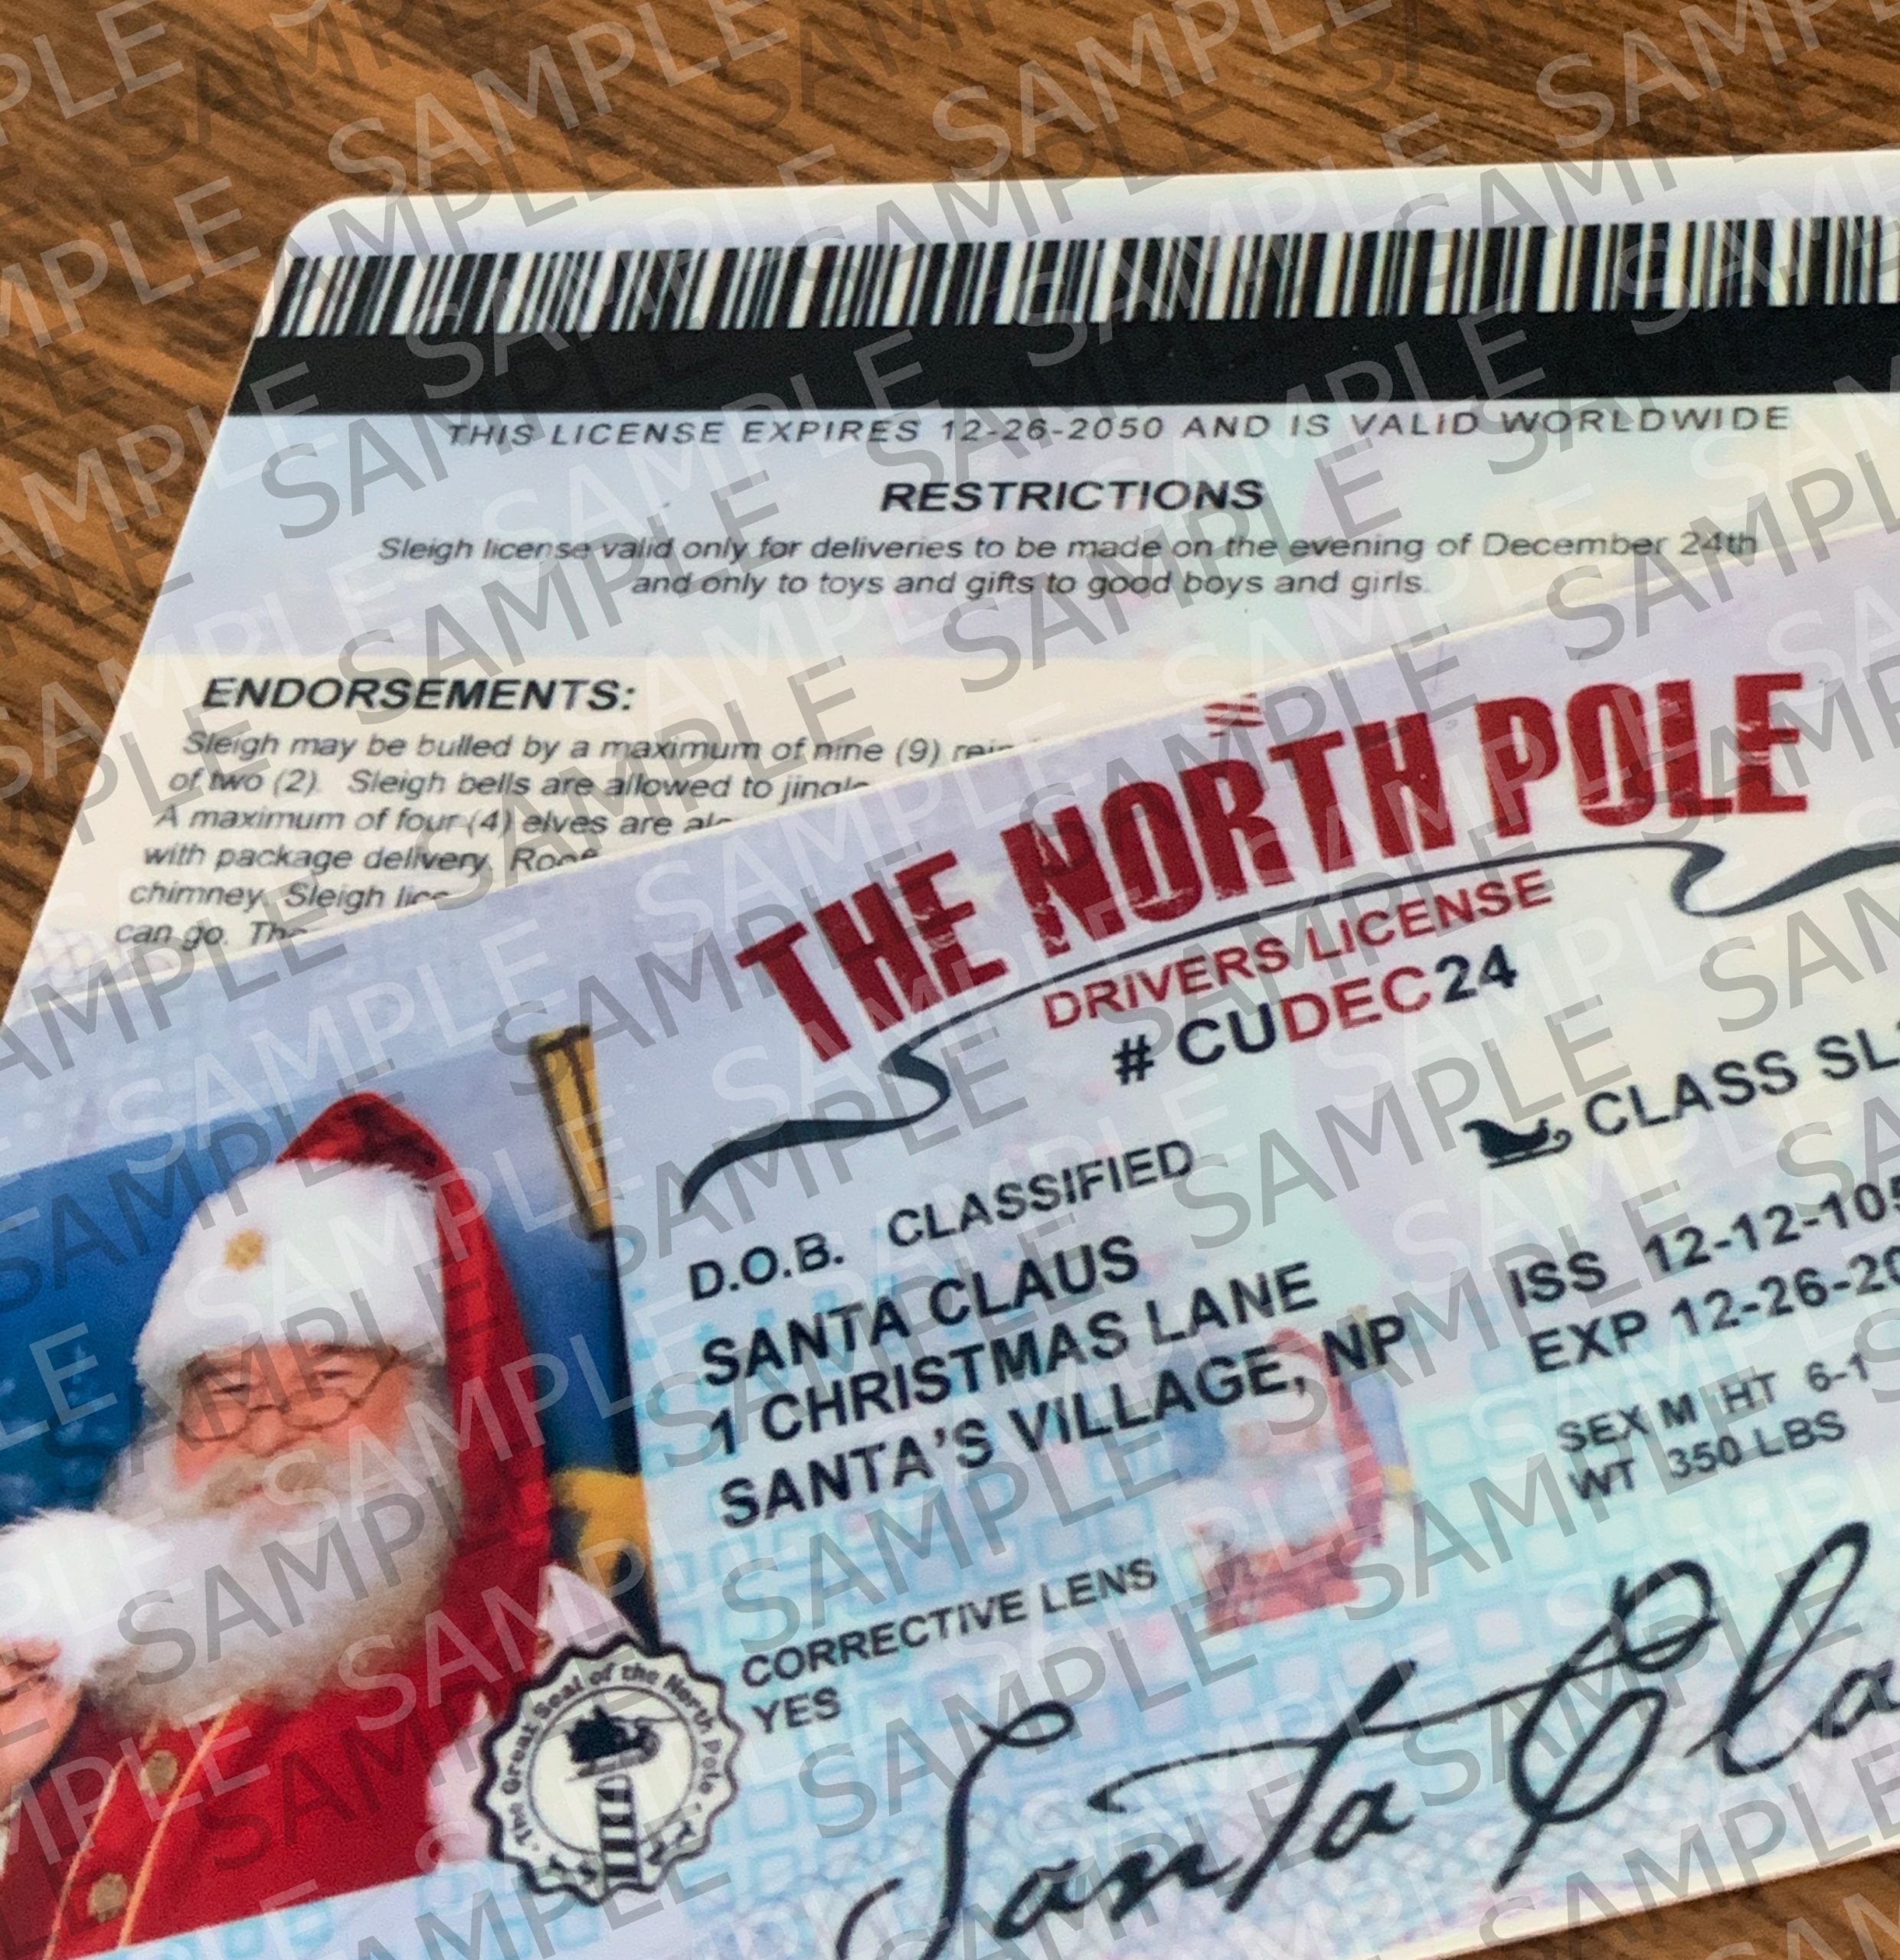 Santa Claus Lost Driving/Sleigh Licence